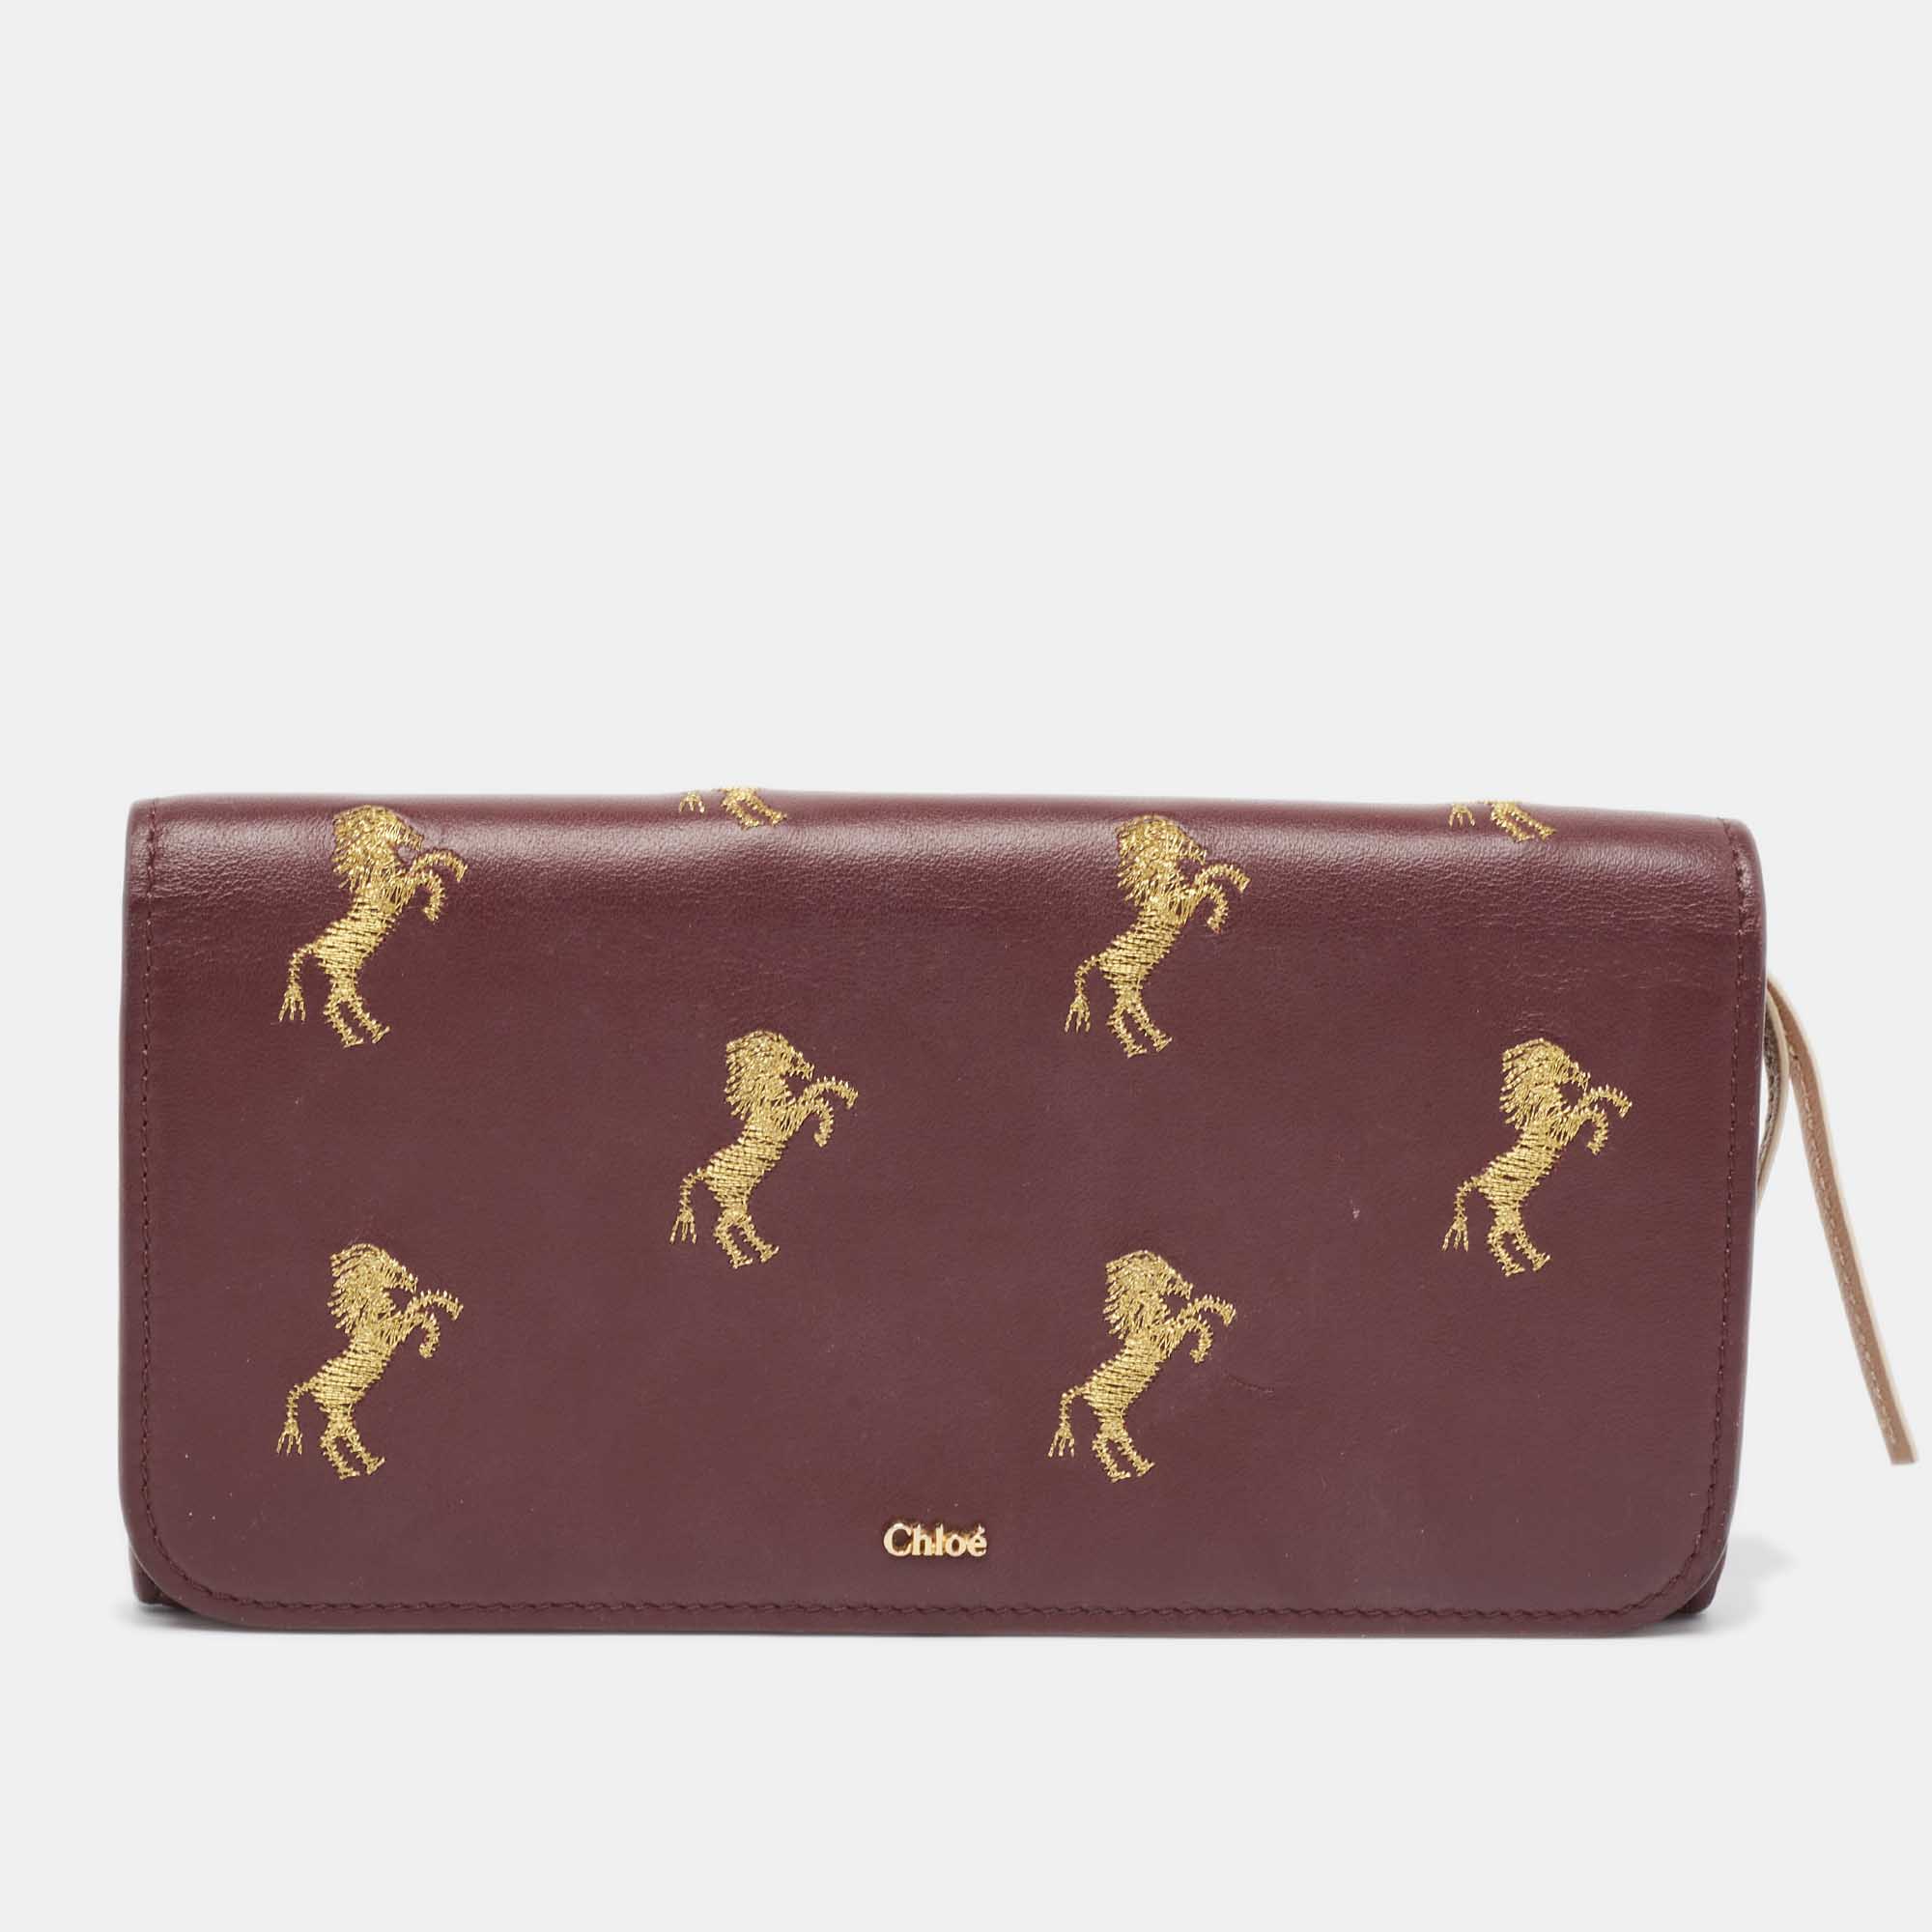 Pre-owned Chloé Burgundy Leather Horse Embroidered Flap Continental Wallet